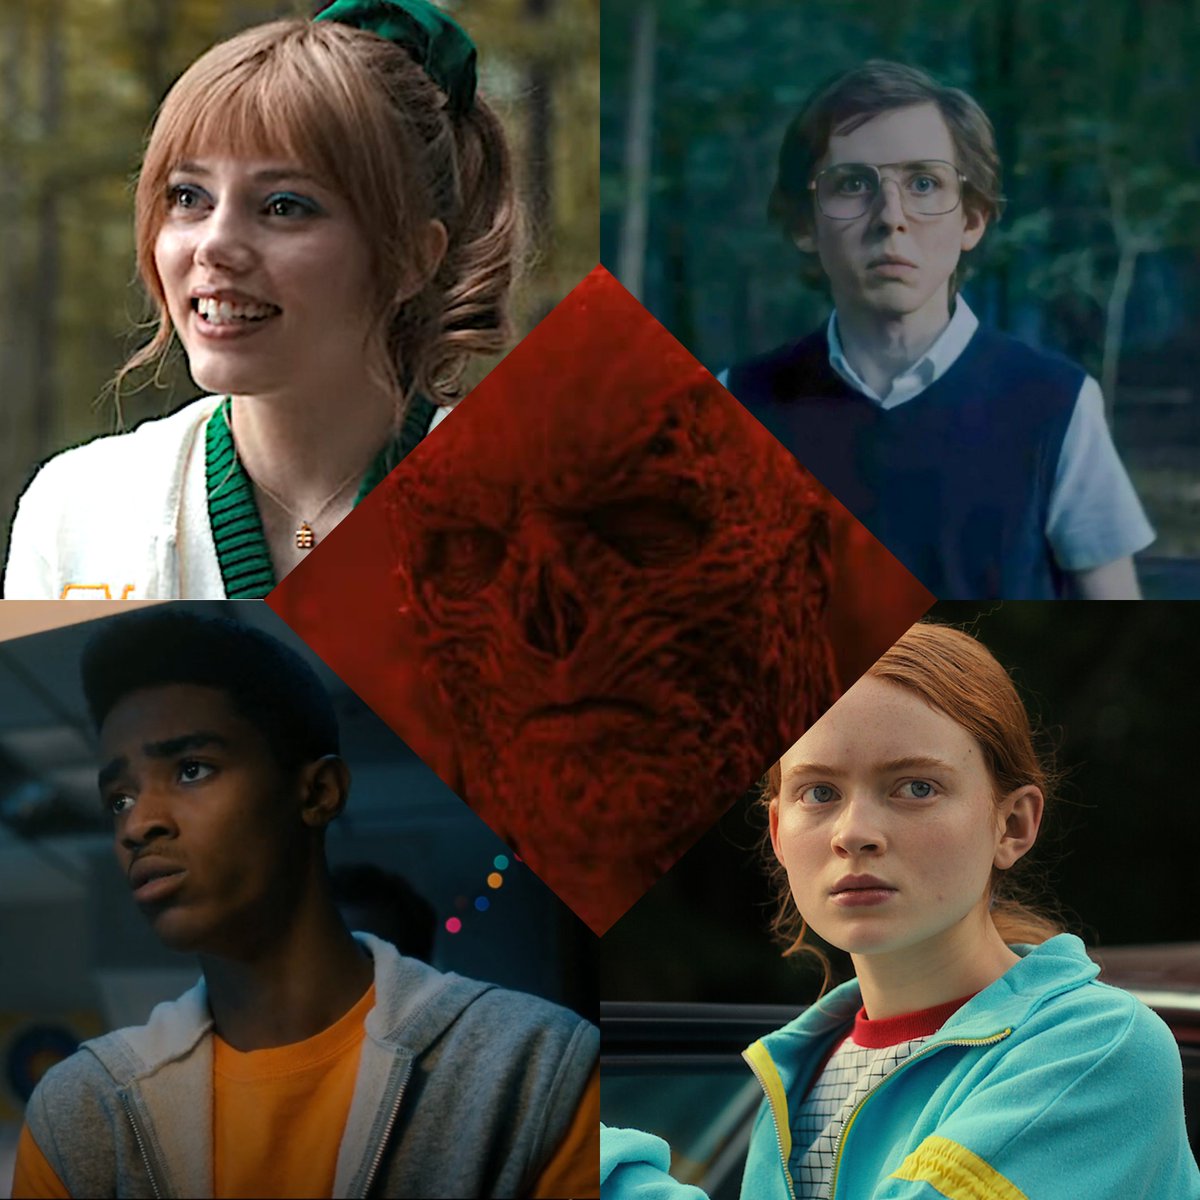 i need to know how far back the foreshadowing in stranger things goes, cause i swear the mobile in jane's baby room (which the camera pans in on TWICE) was an easter egg for vecna below his 4 victims. they're even color coded for each one's attire, with a music symbol above them!